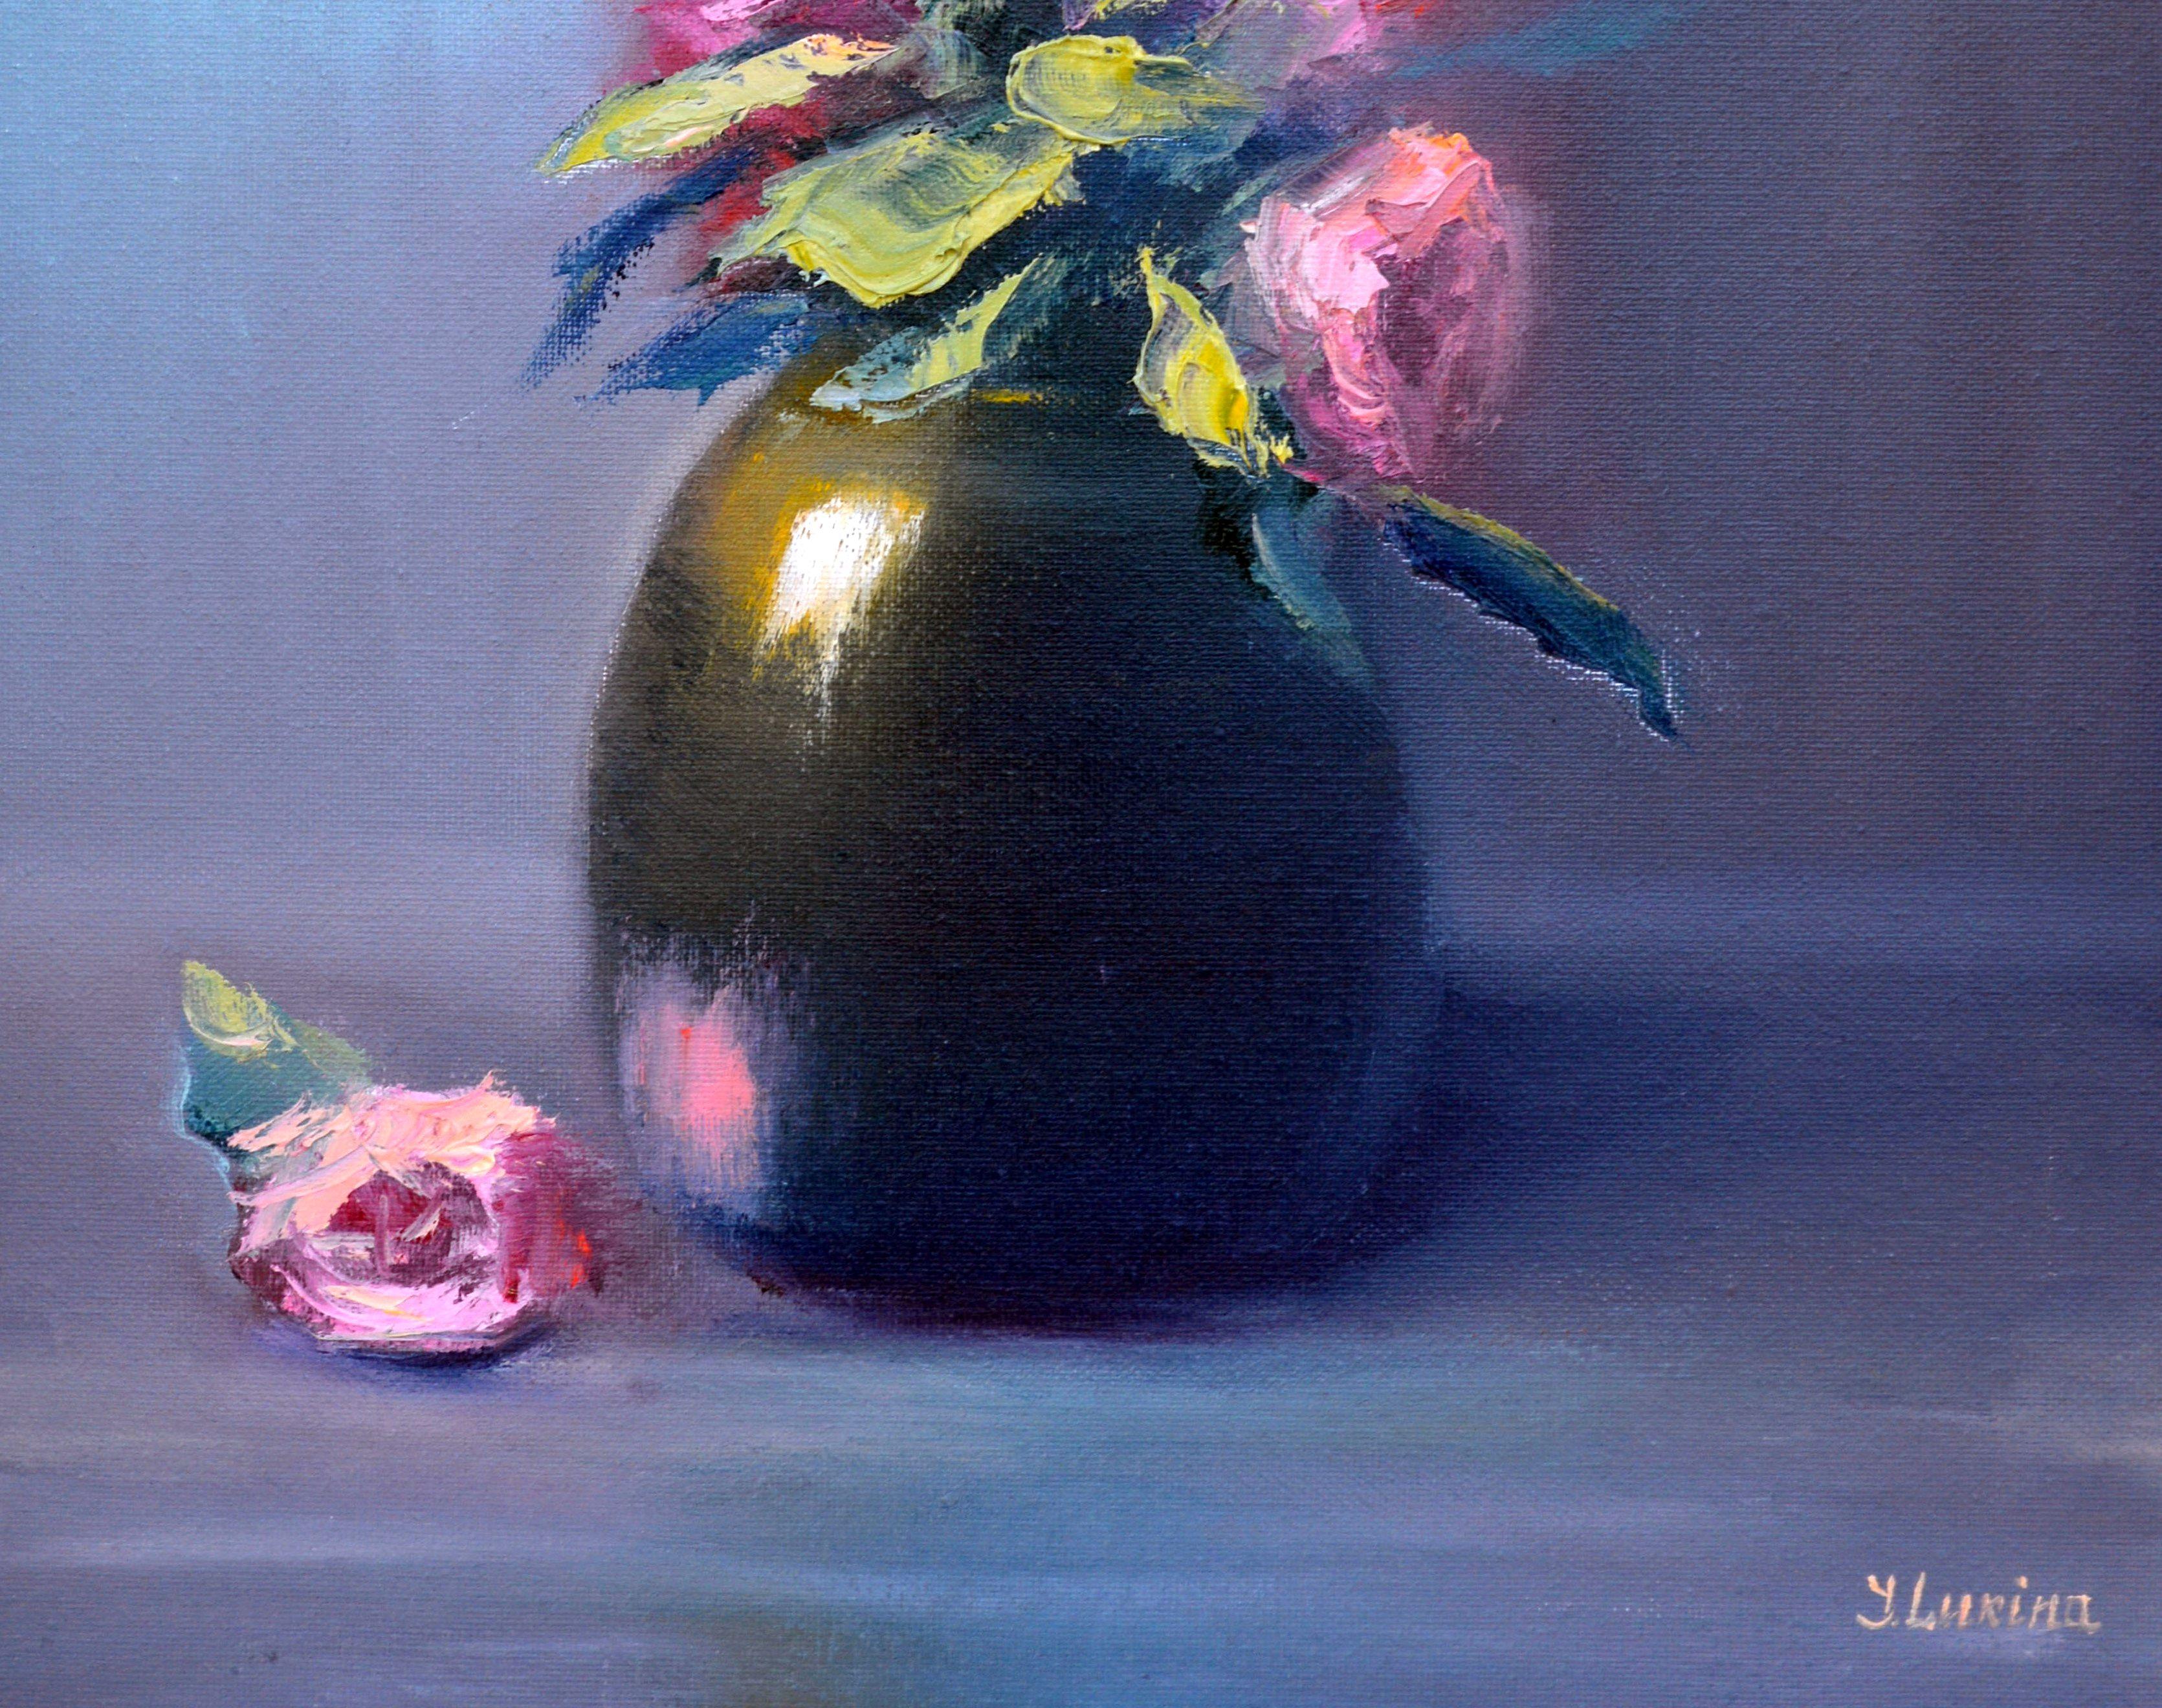 In this oil painting, I sought to capture the elegance and tranquility of nature's beauty with a touch of vintage allure. The brushstrokes convey both the softness and the vibrancy of the petals, creating a dance of light and color. Designed to